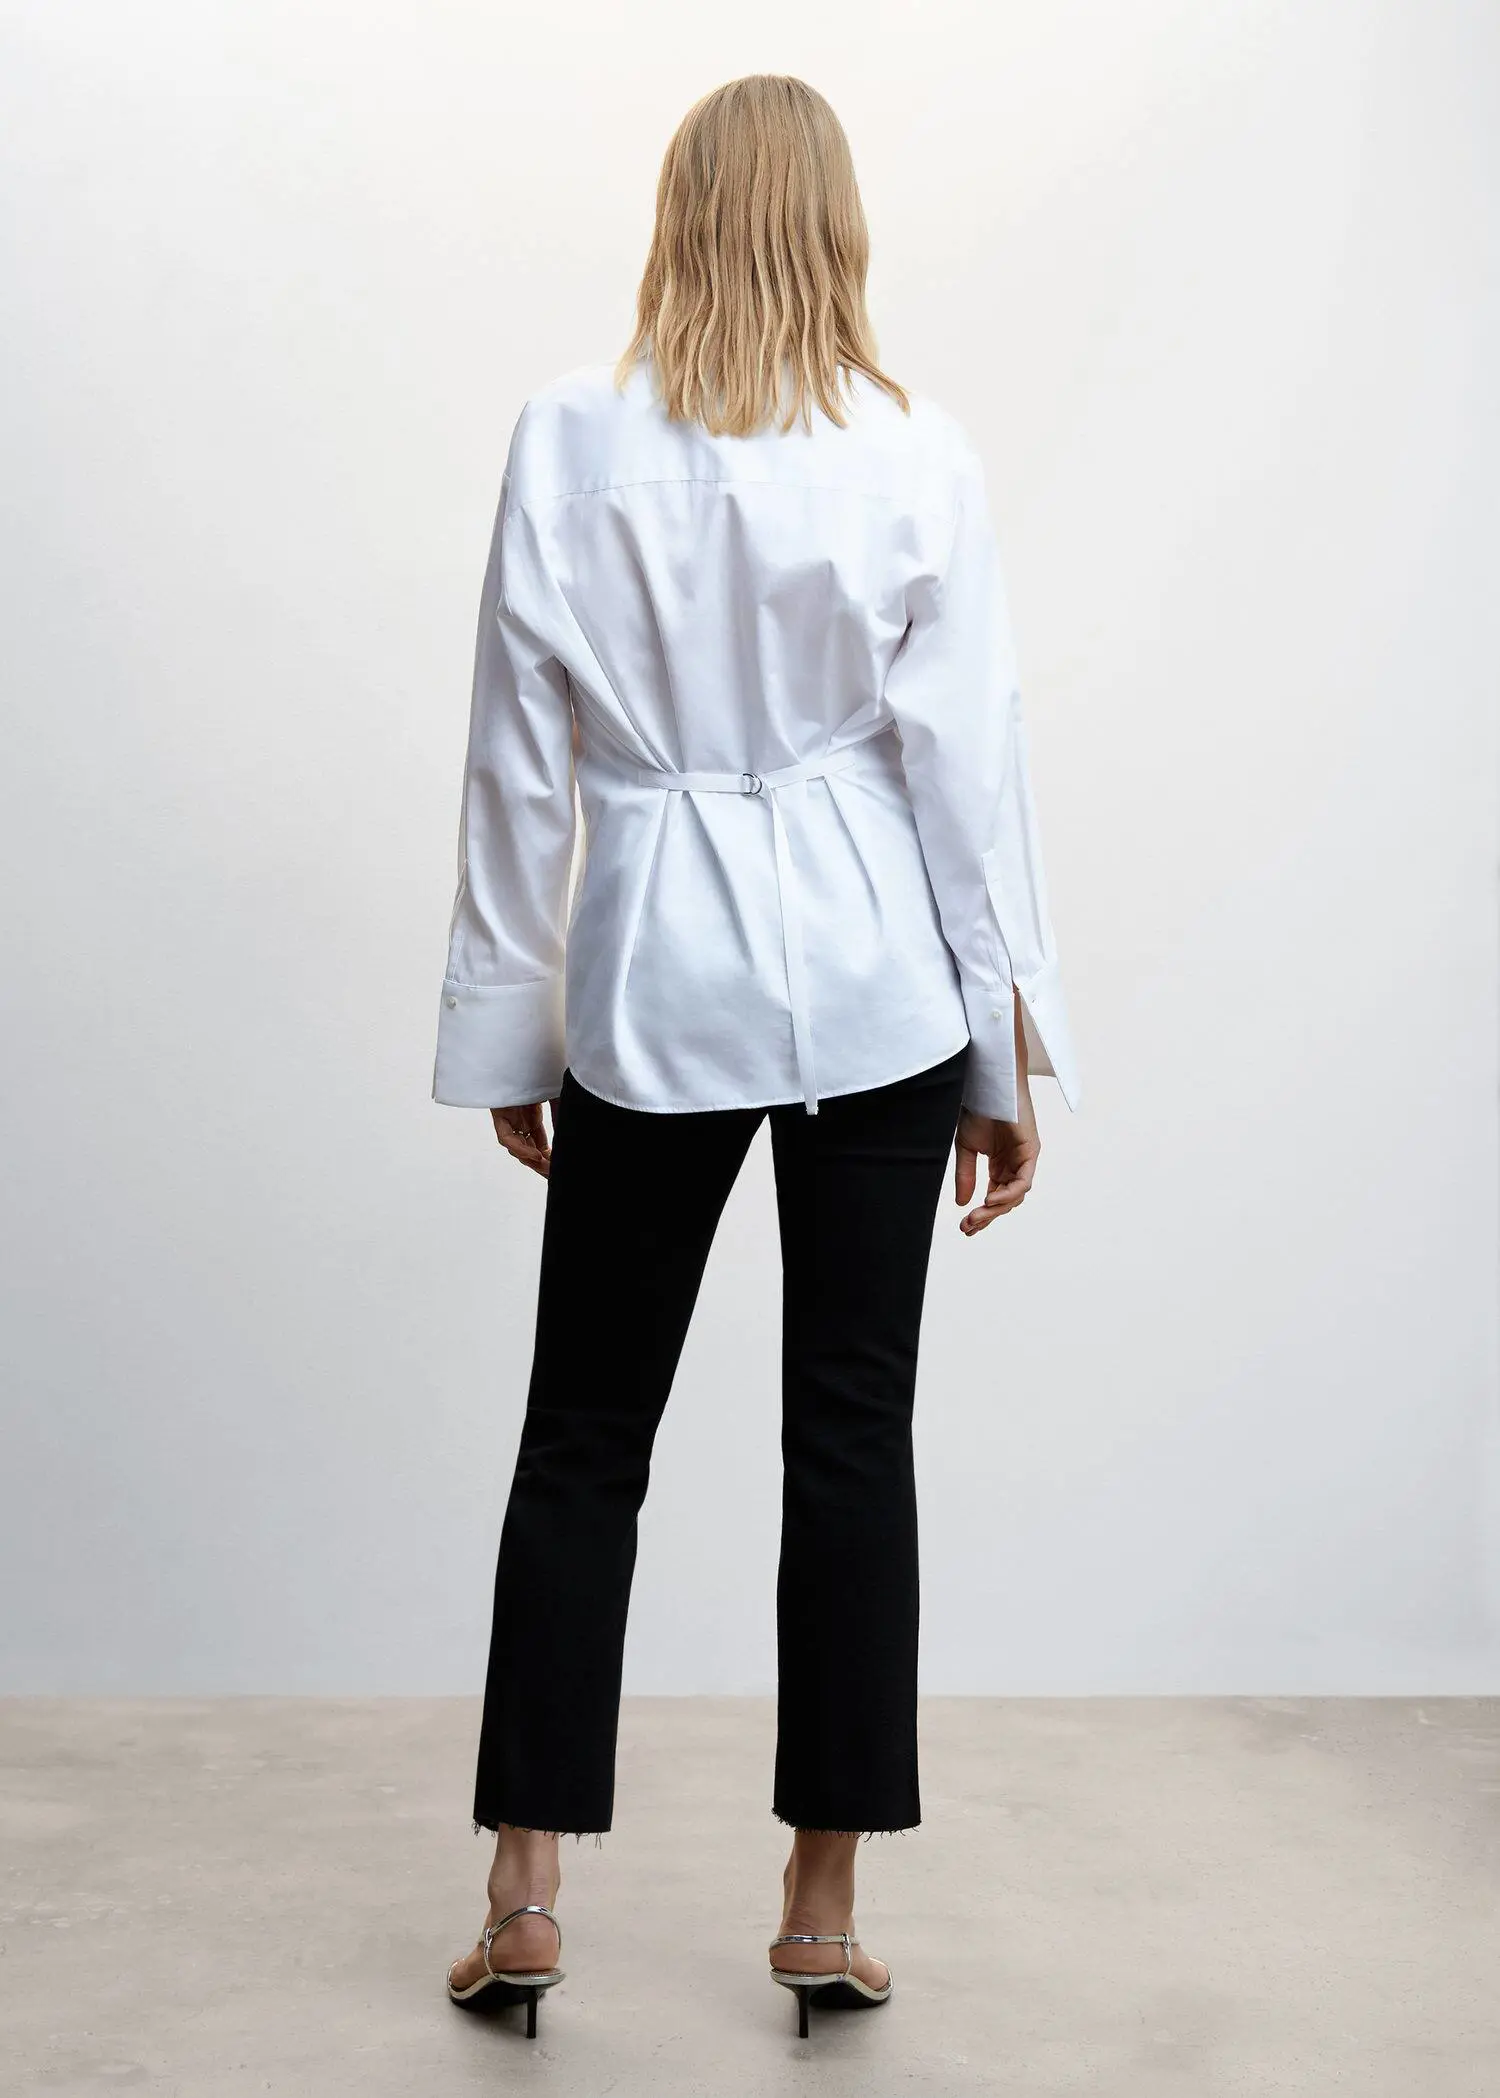 Mango Maternity flared cropped jeans. a woman wearing a white shirt and black pants. 